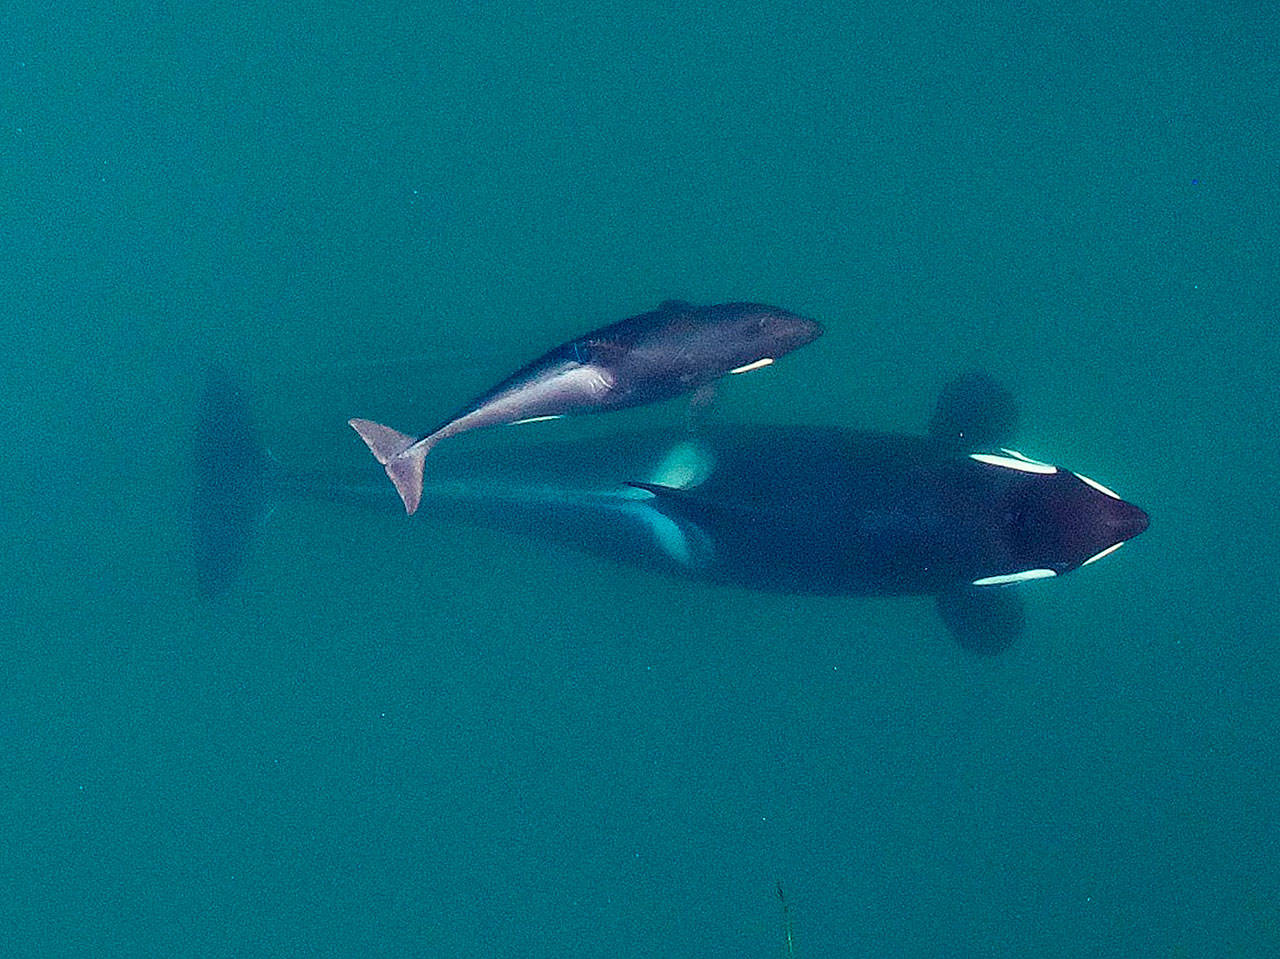 This September 2015 photo provided by NOAA Fisheries shows an aerial view of adult female Southern Resident killer whale J16 swimming with her calf J50. (NOAA Fisheries/Vancouver Aquarium via AP)